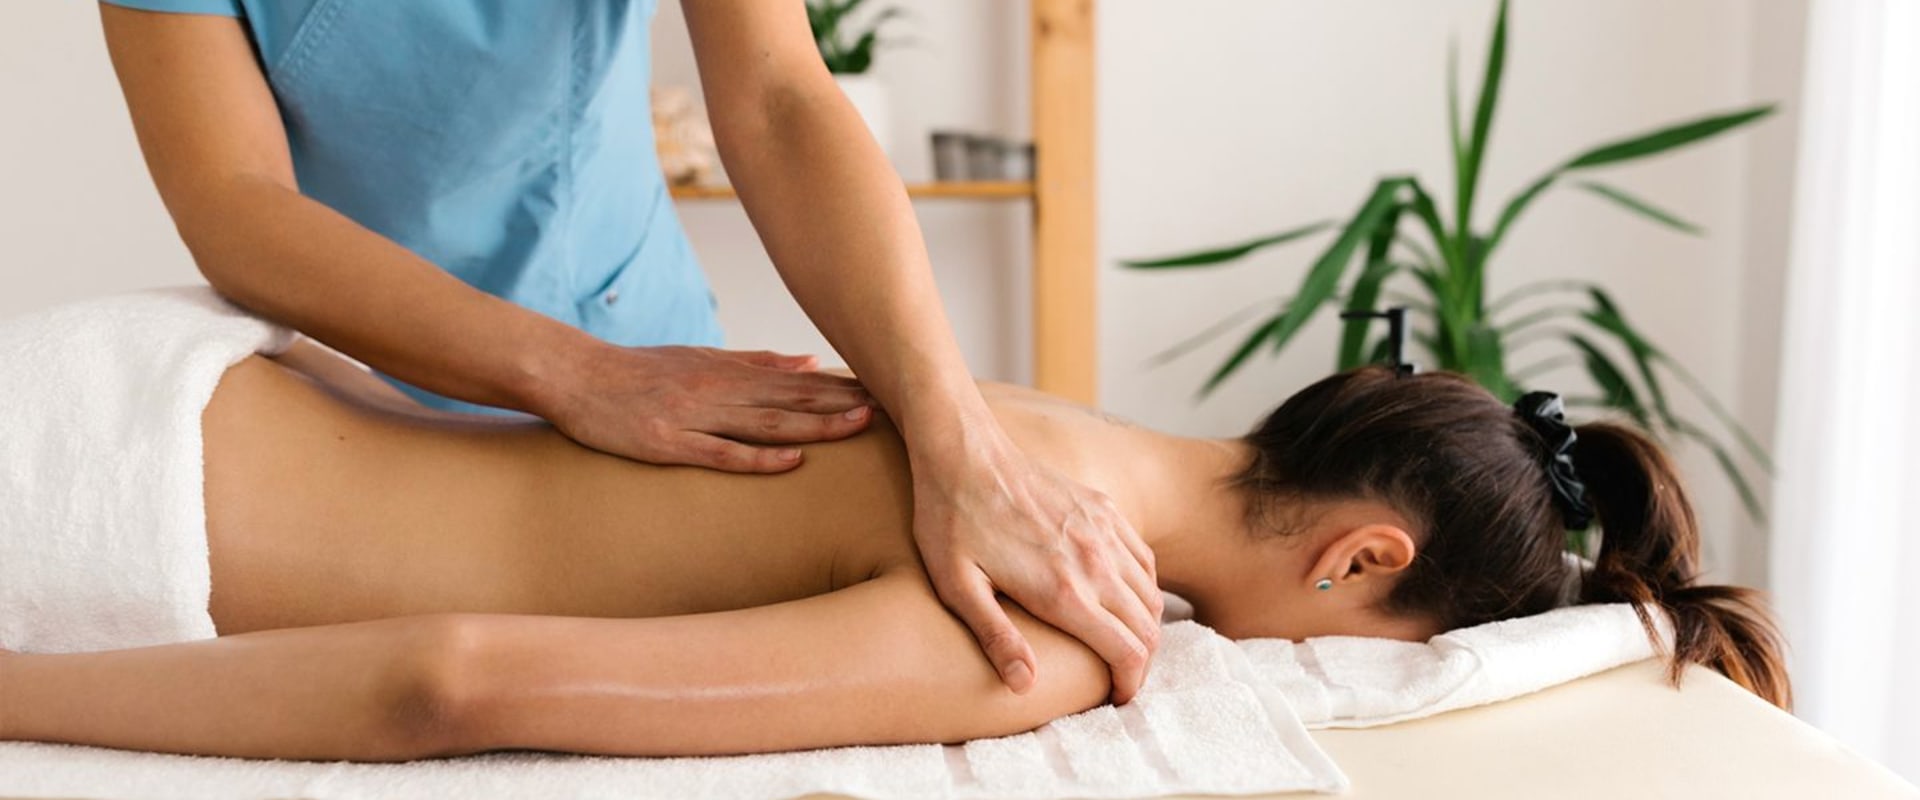 Exploring Different Types of Body Treatments